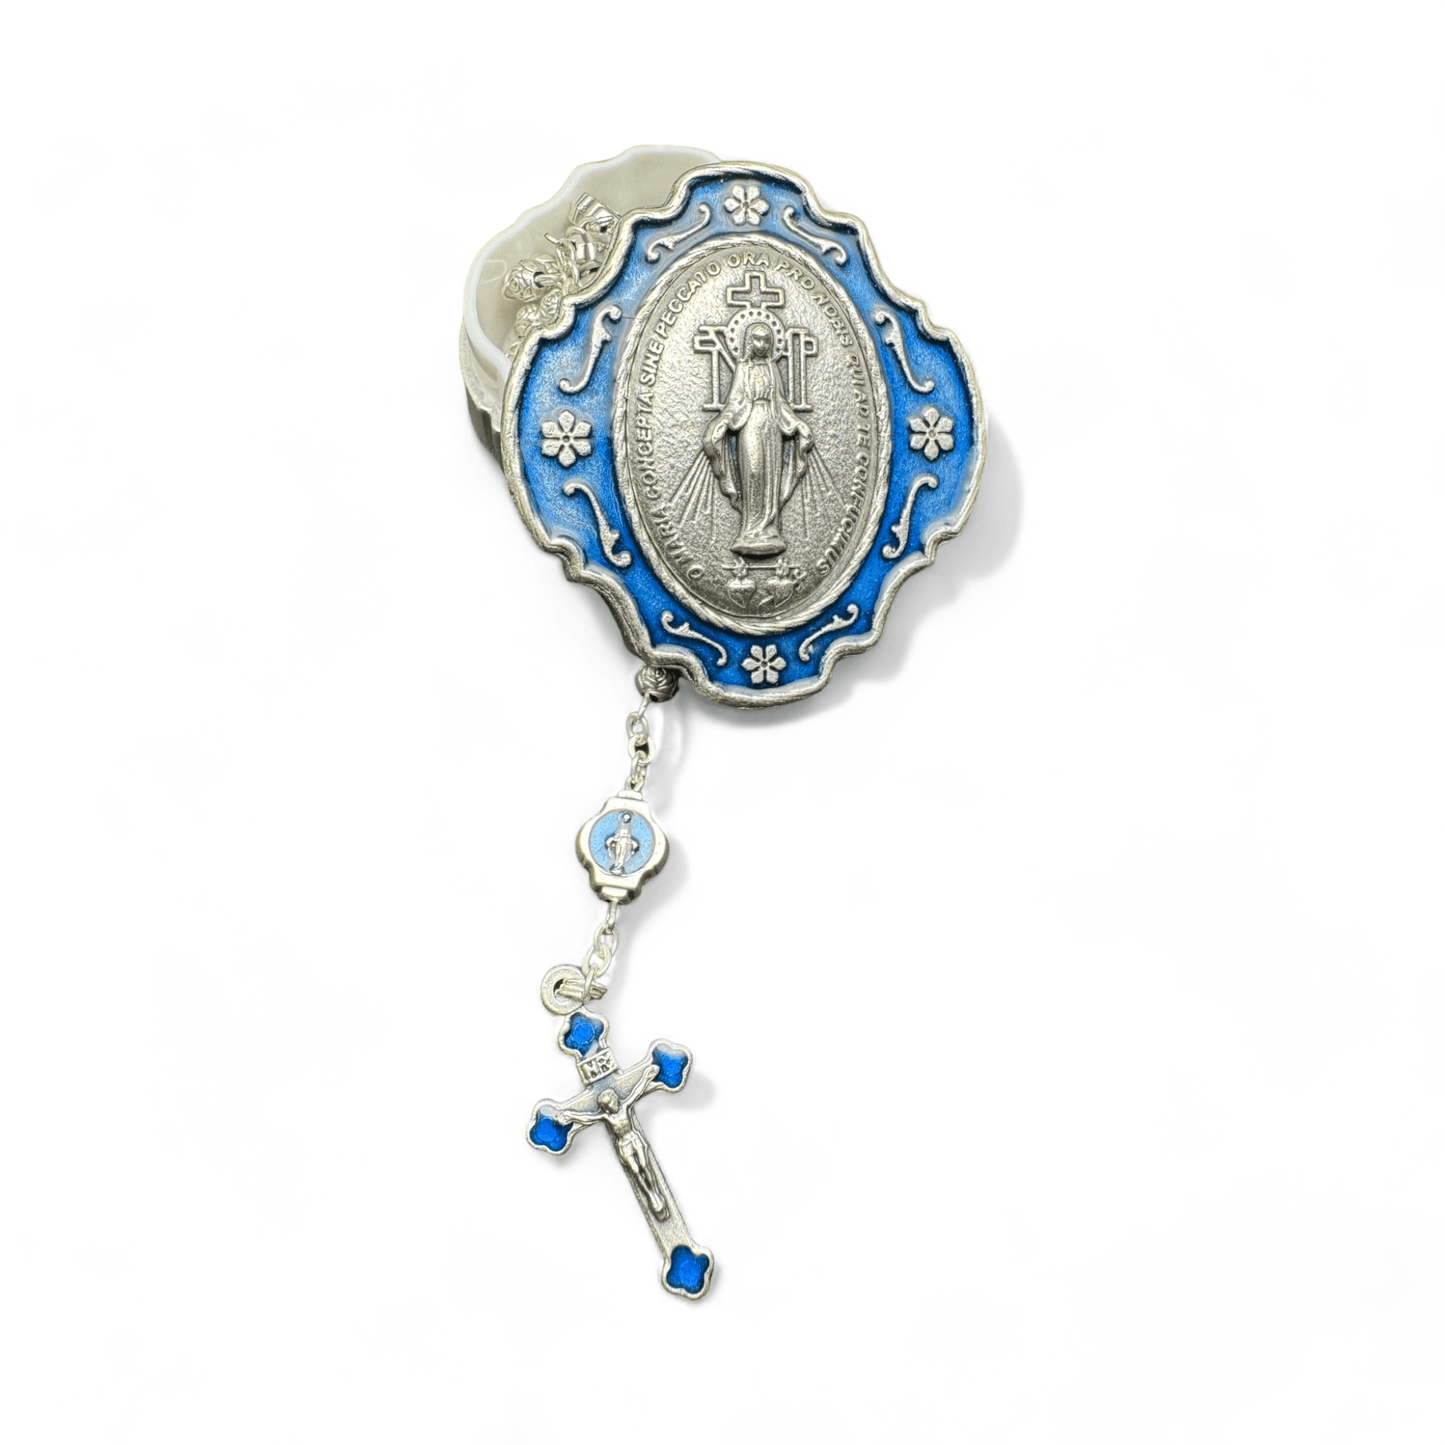 Catholically Rosaries Blessed Virgin Mary - Our Lady -Tiny Rosary Blessed By Pope